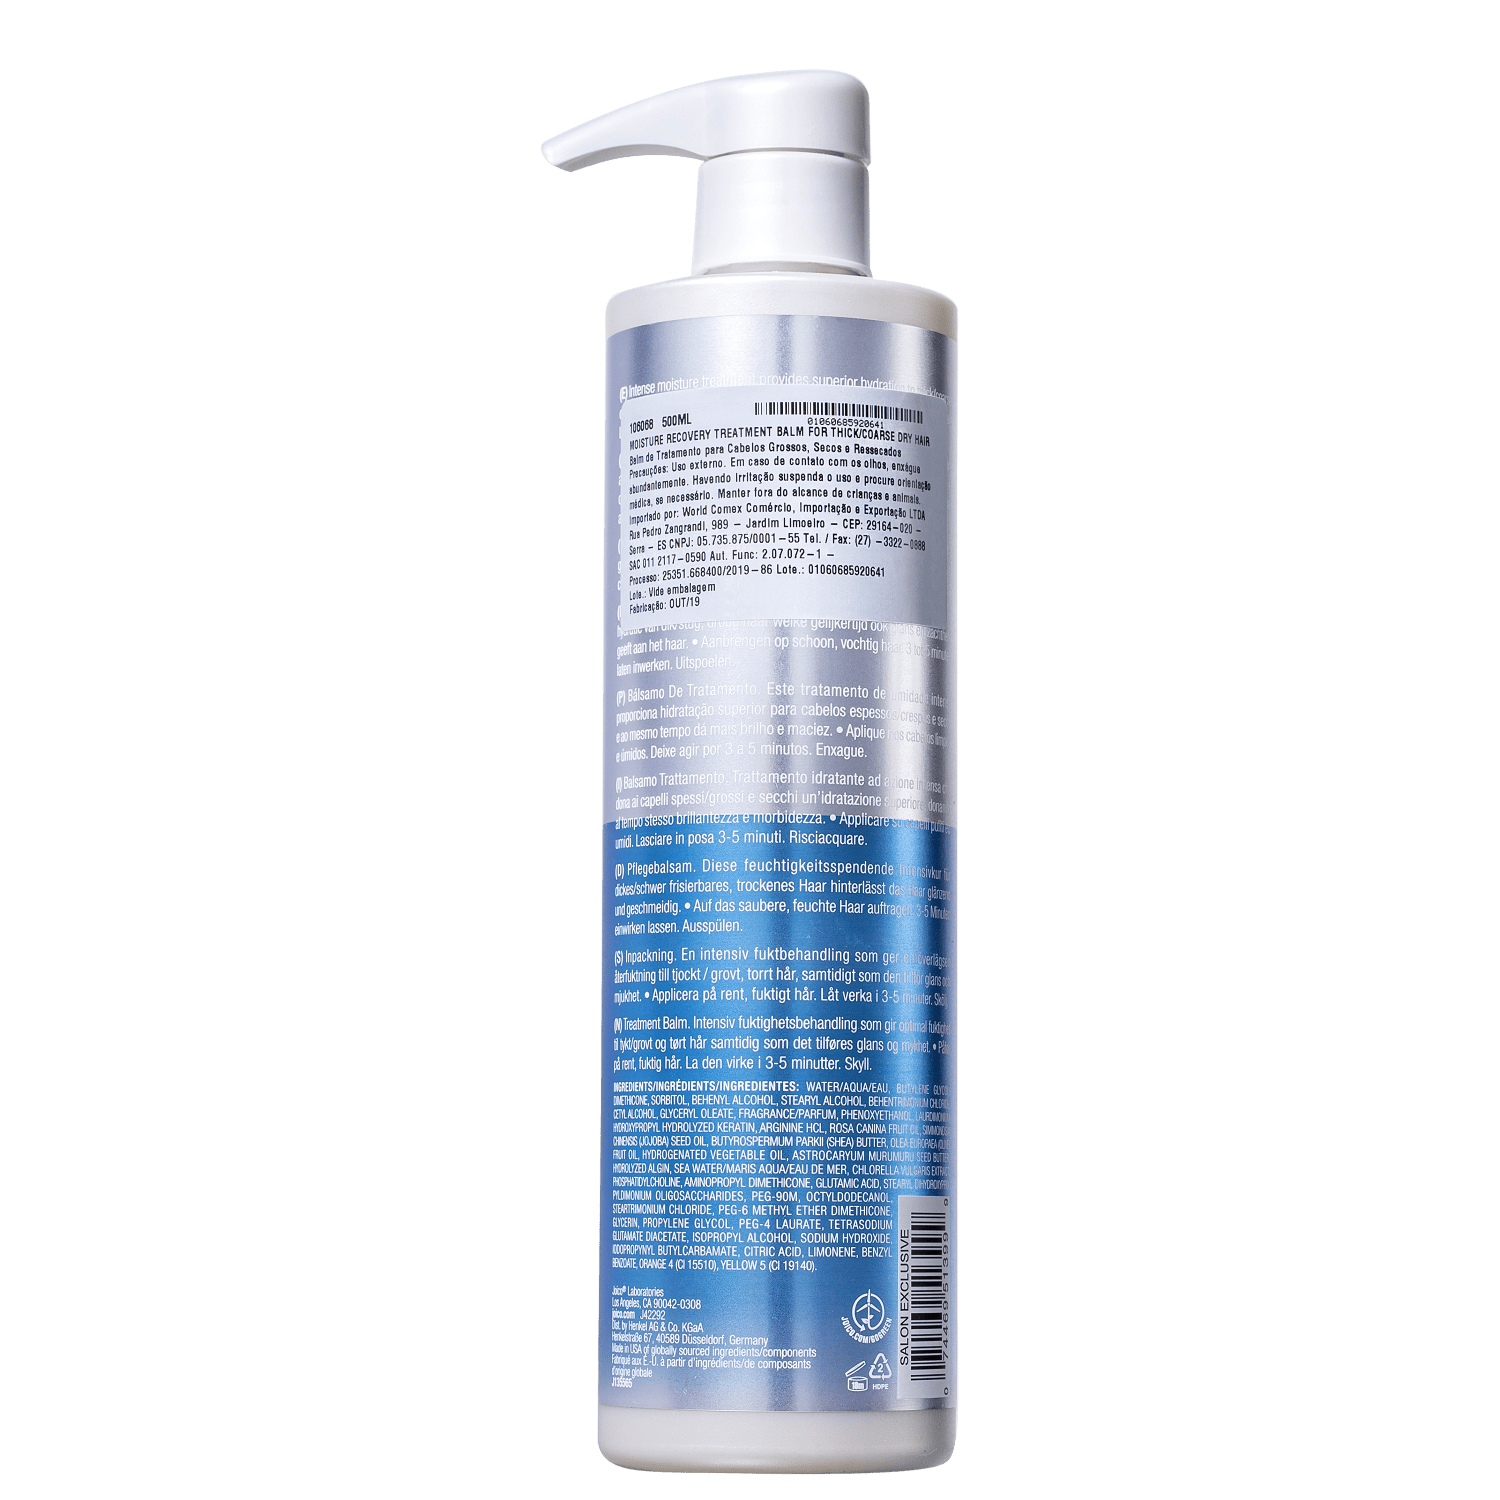 Joico-Moisture-Recovery-Smart-Release-Shampoo-300ml - Rede dos